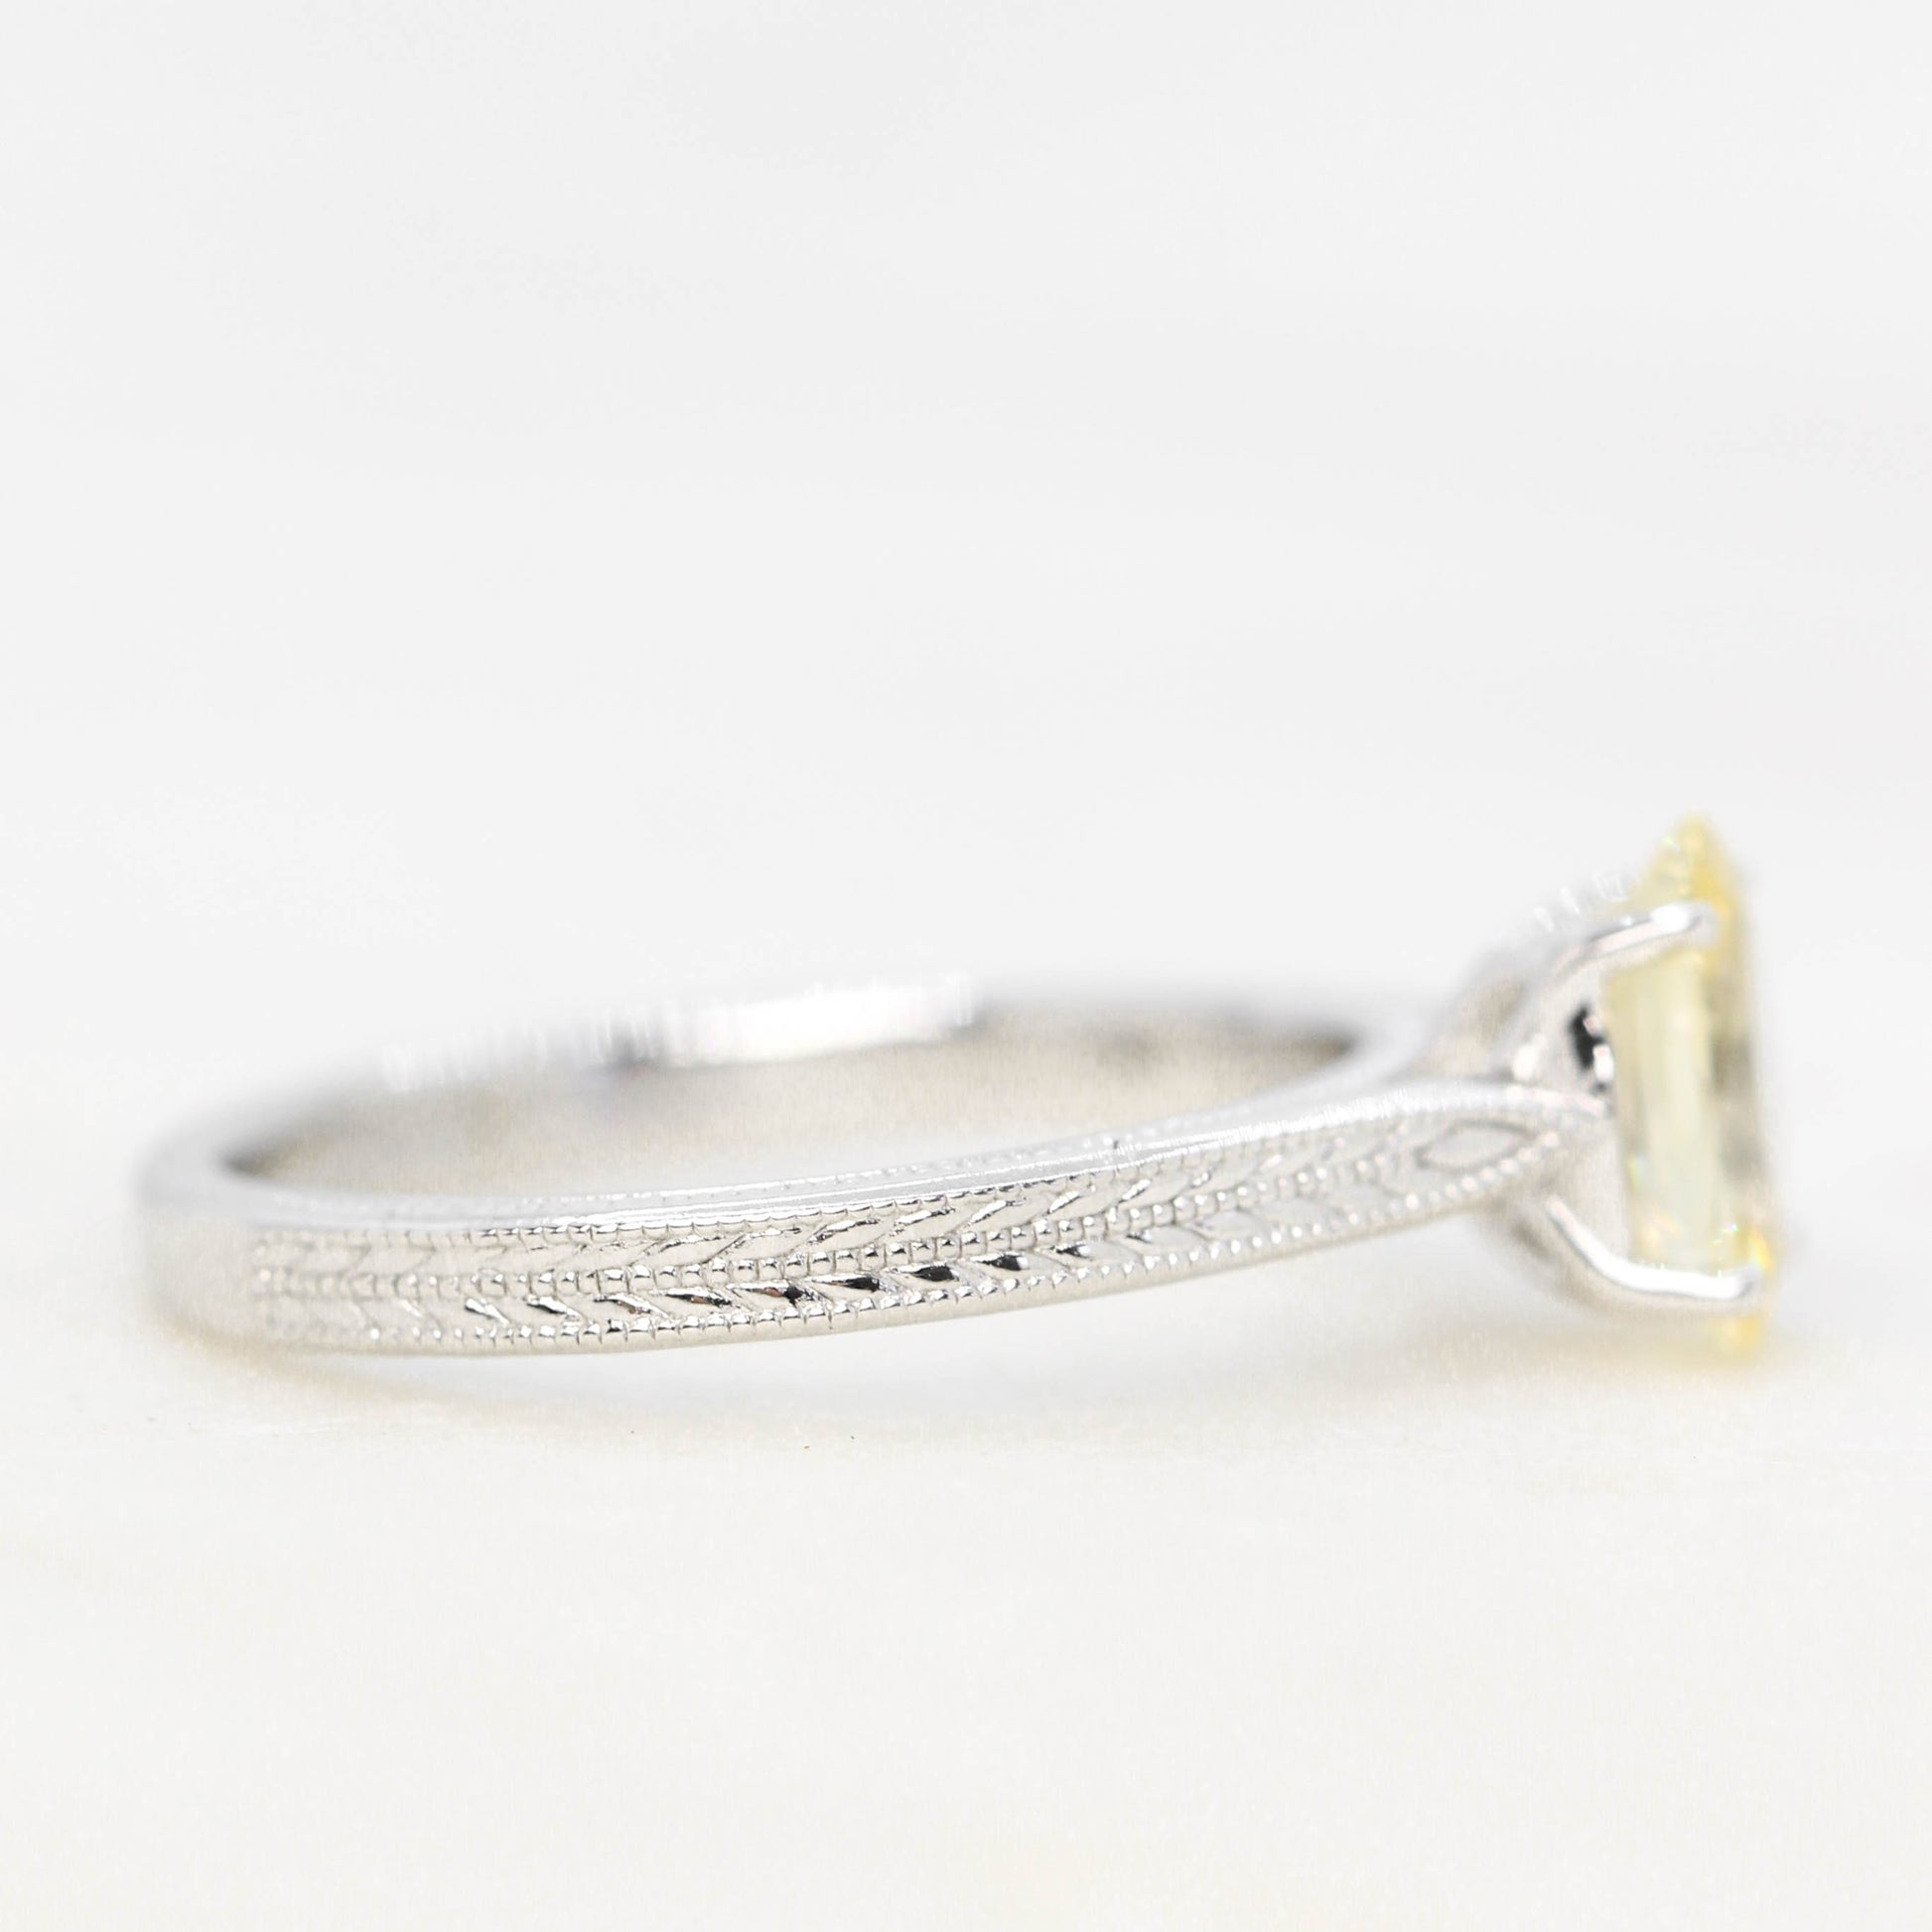 Edith Ring with a 1.28 Carat Yellow Oval Sapphire in 14k White Gold - Ready to Size and Ship - Midwinter Co. Alternative Bridal Rings and Modern Fine Jewelry